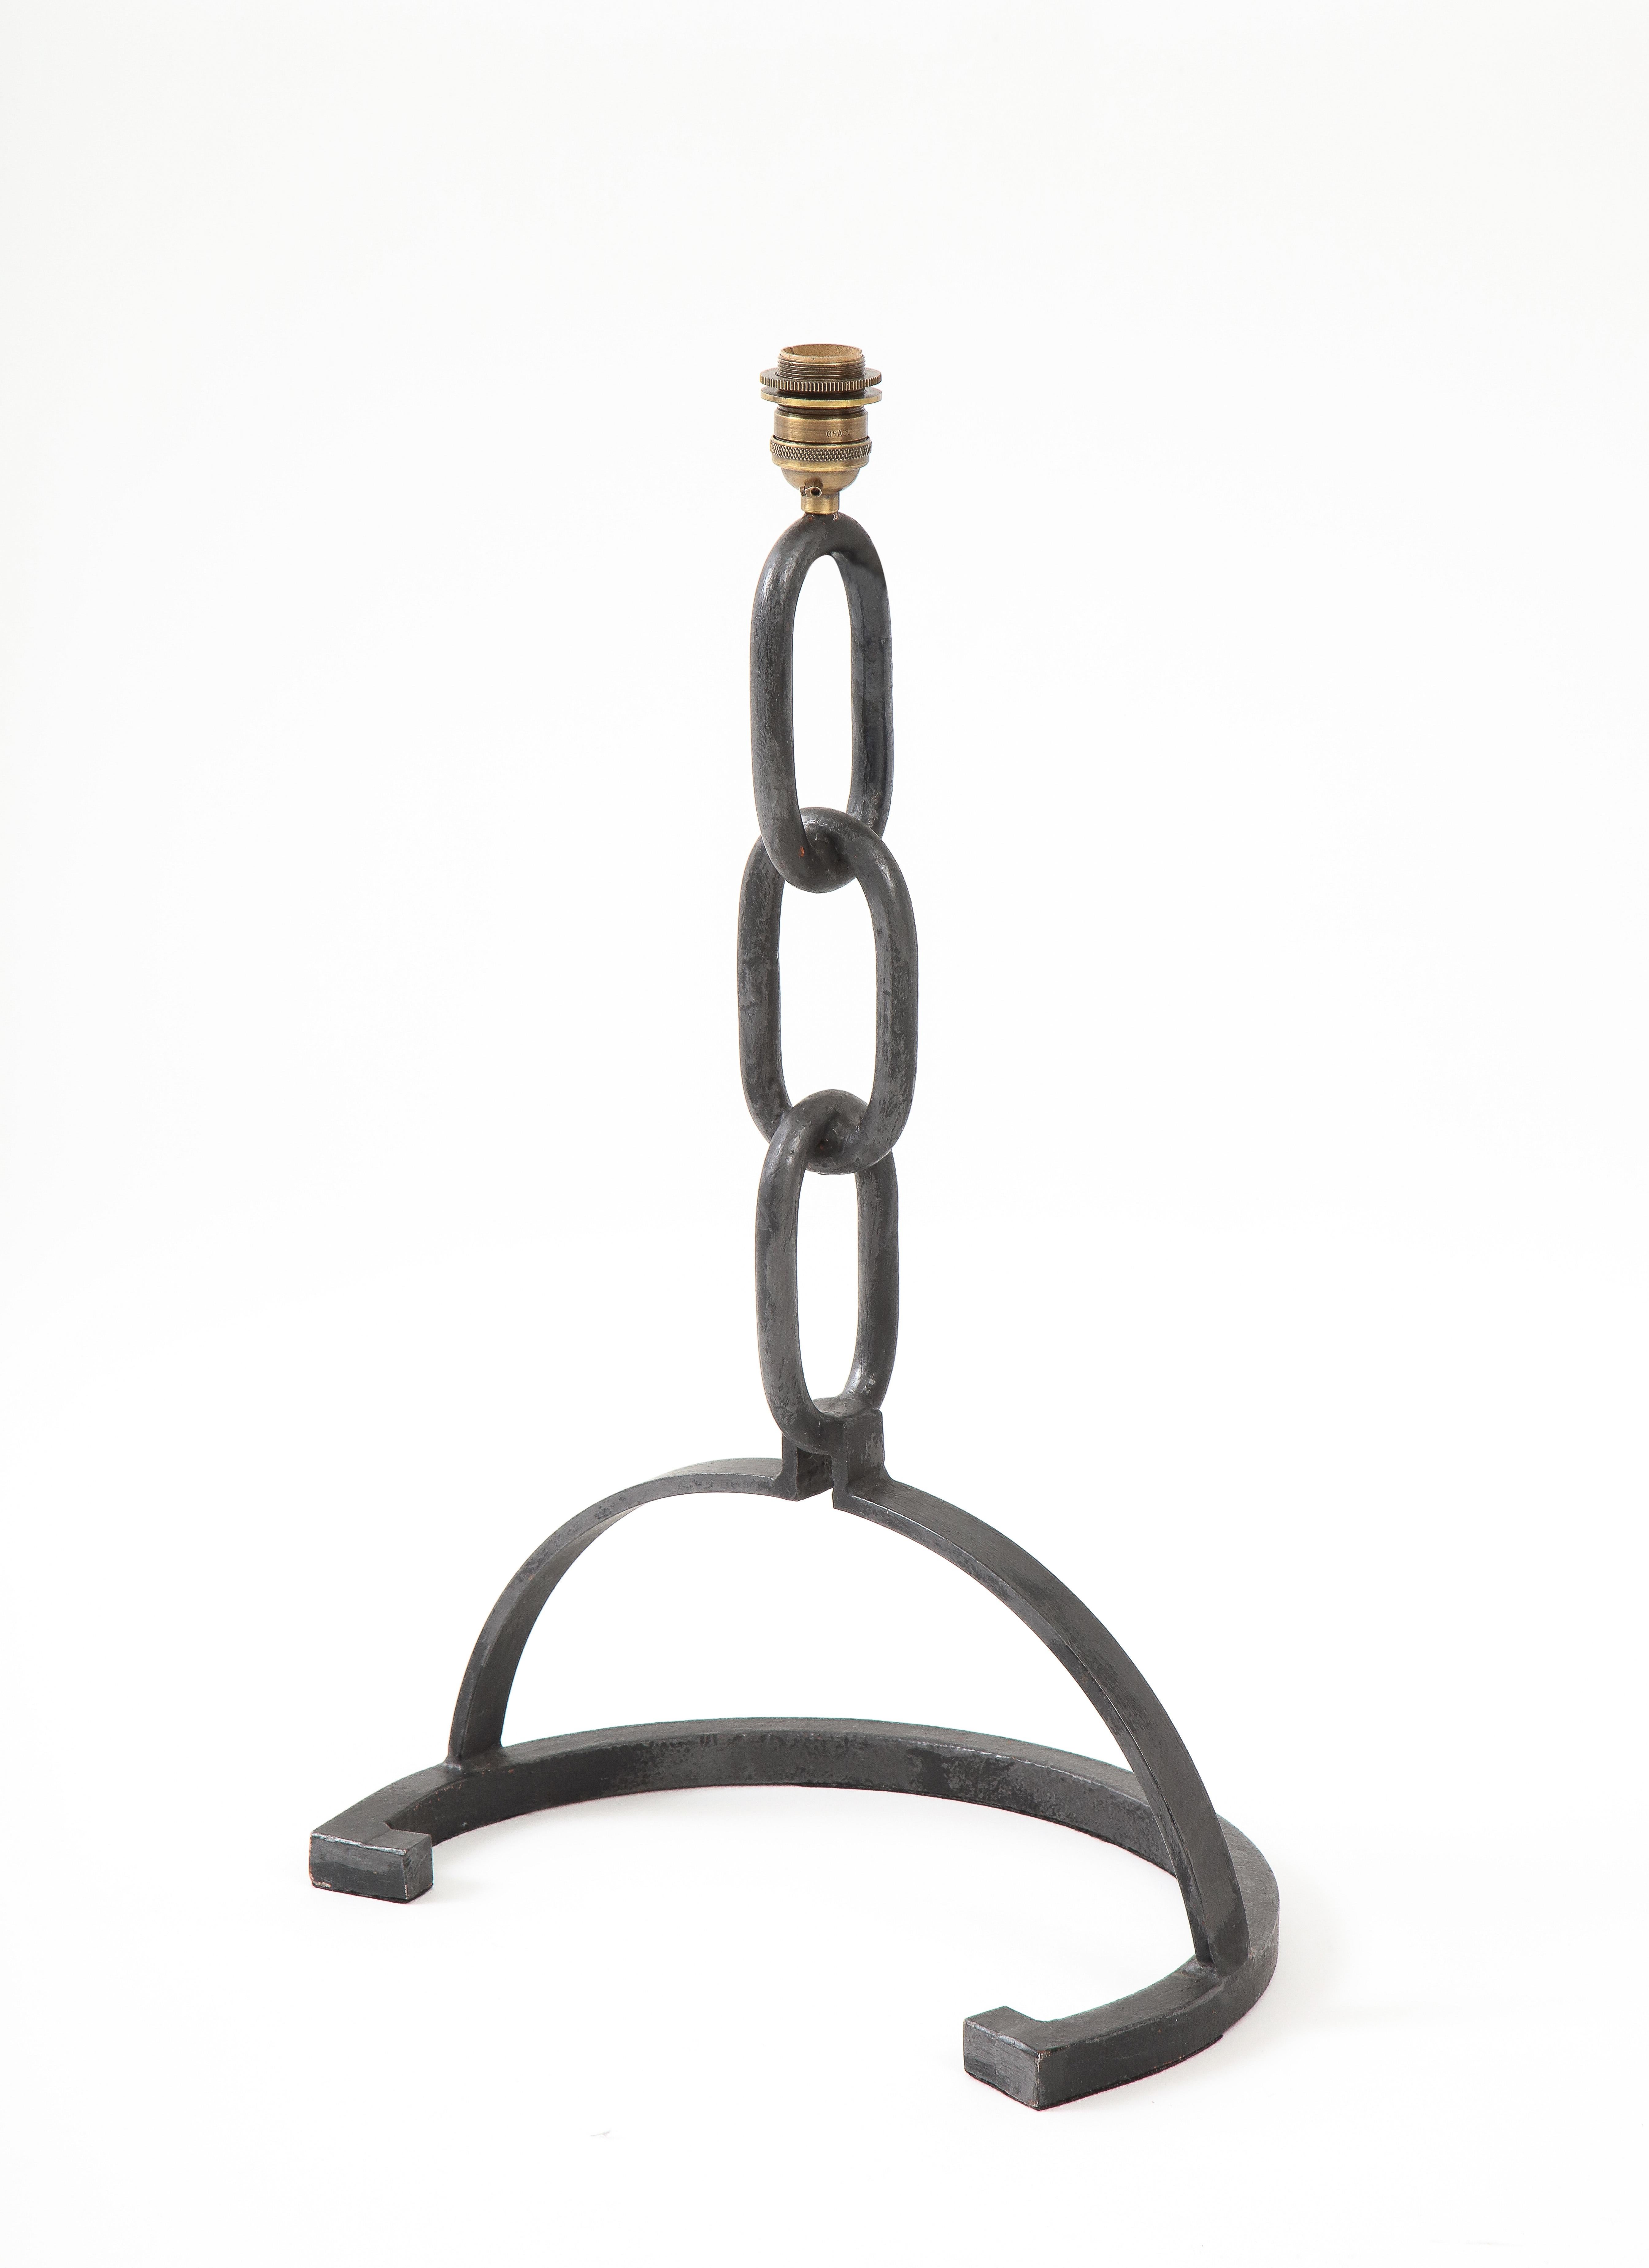 Brutalist cast iron table lamp made of welded chains links with a horseshoe shaped base.